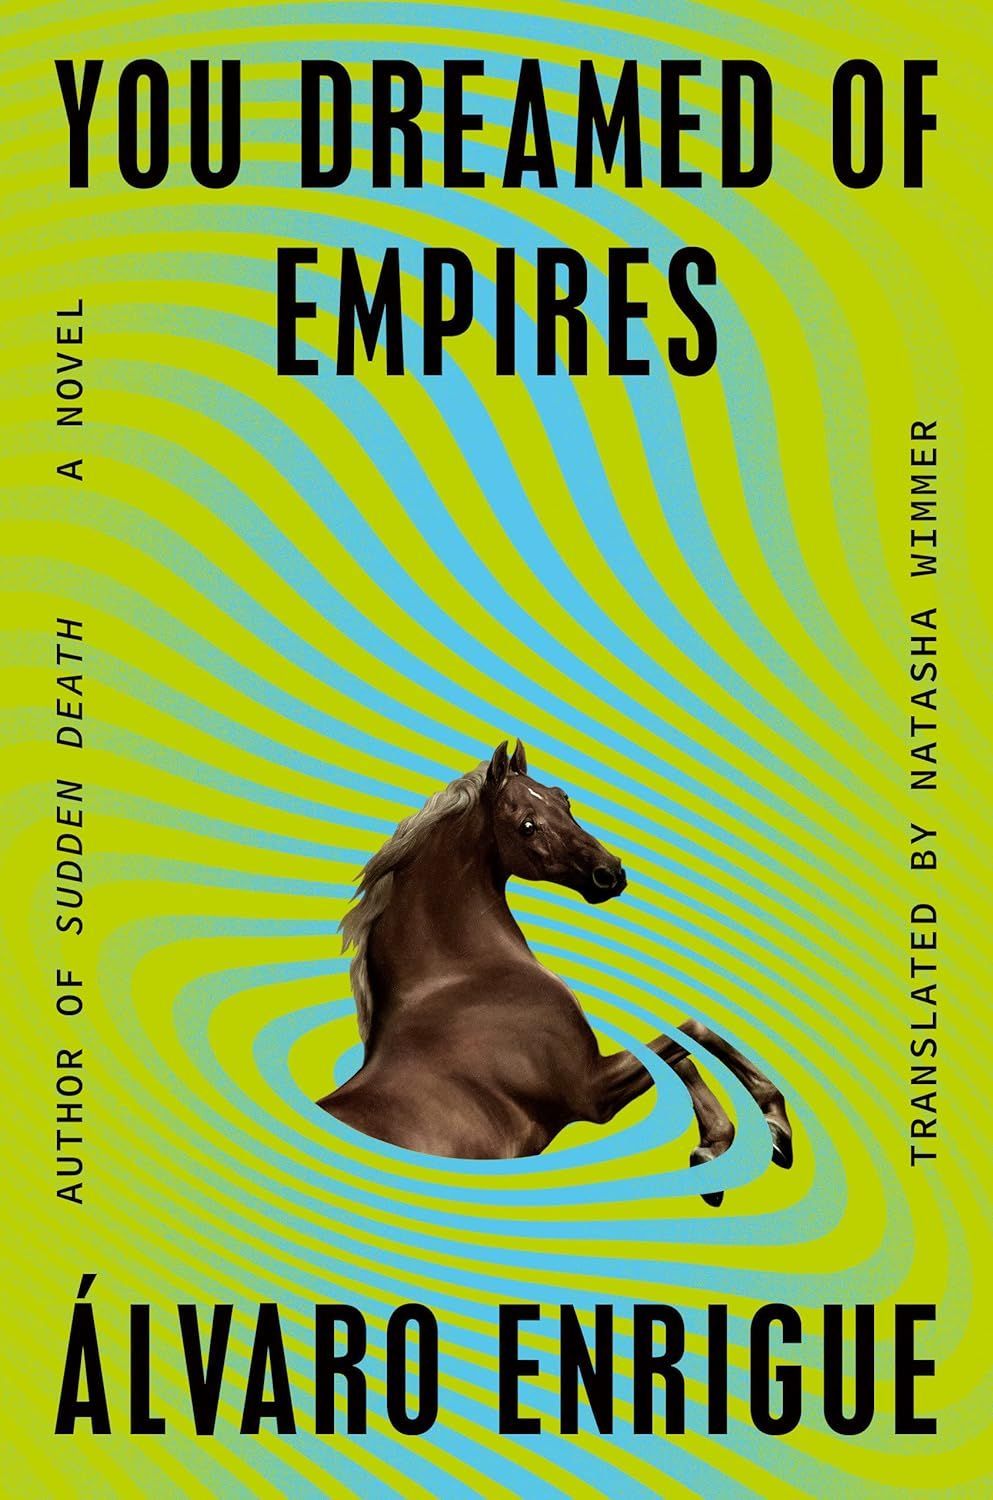 A Story of What-Ifs: On Álvaro Enrigue’s “You Dreamed of Empires”